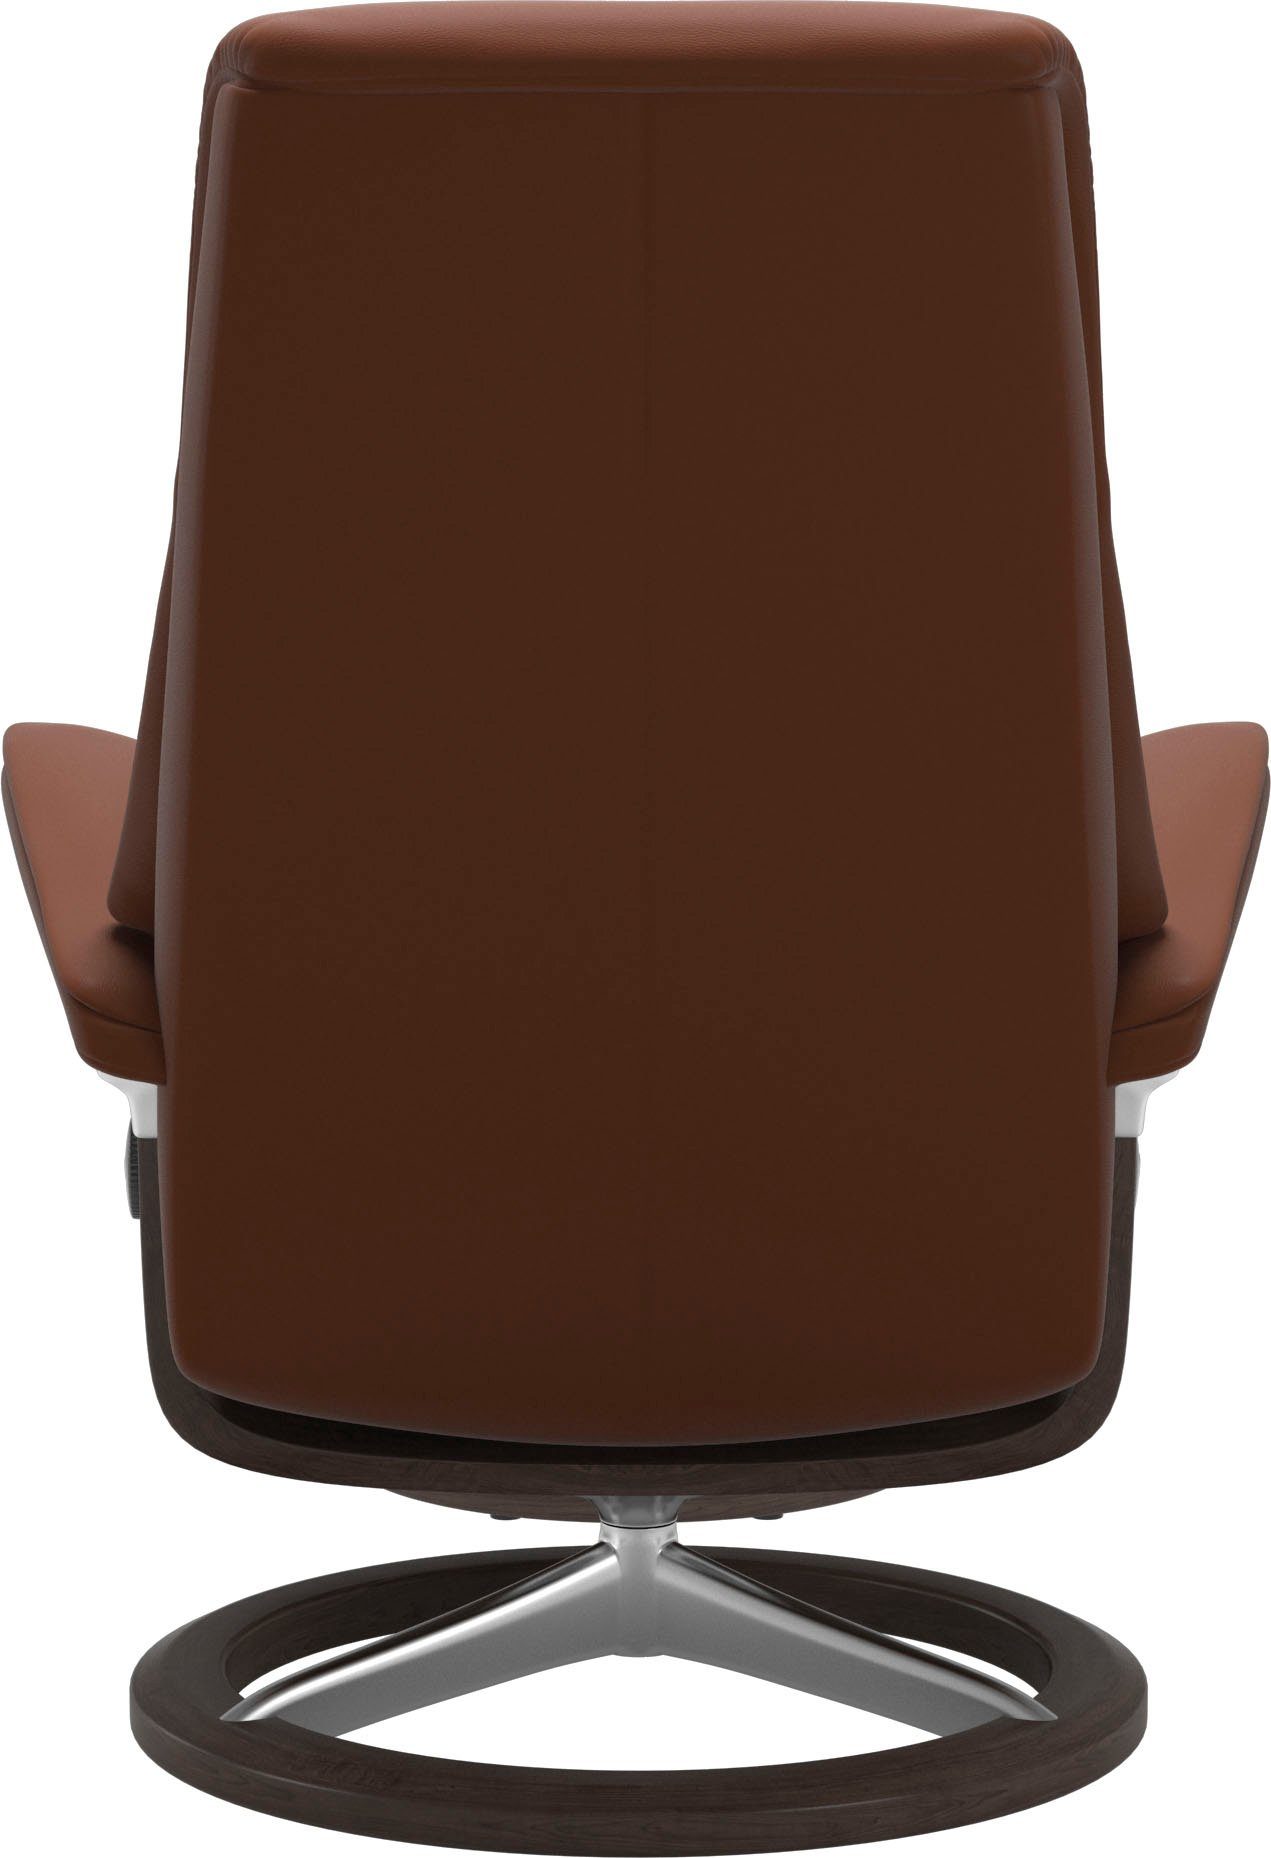 Größe L,Gestell View, Wenge Stressless® Base, Relaxsessel Signature mit